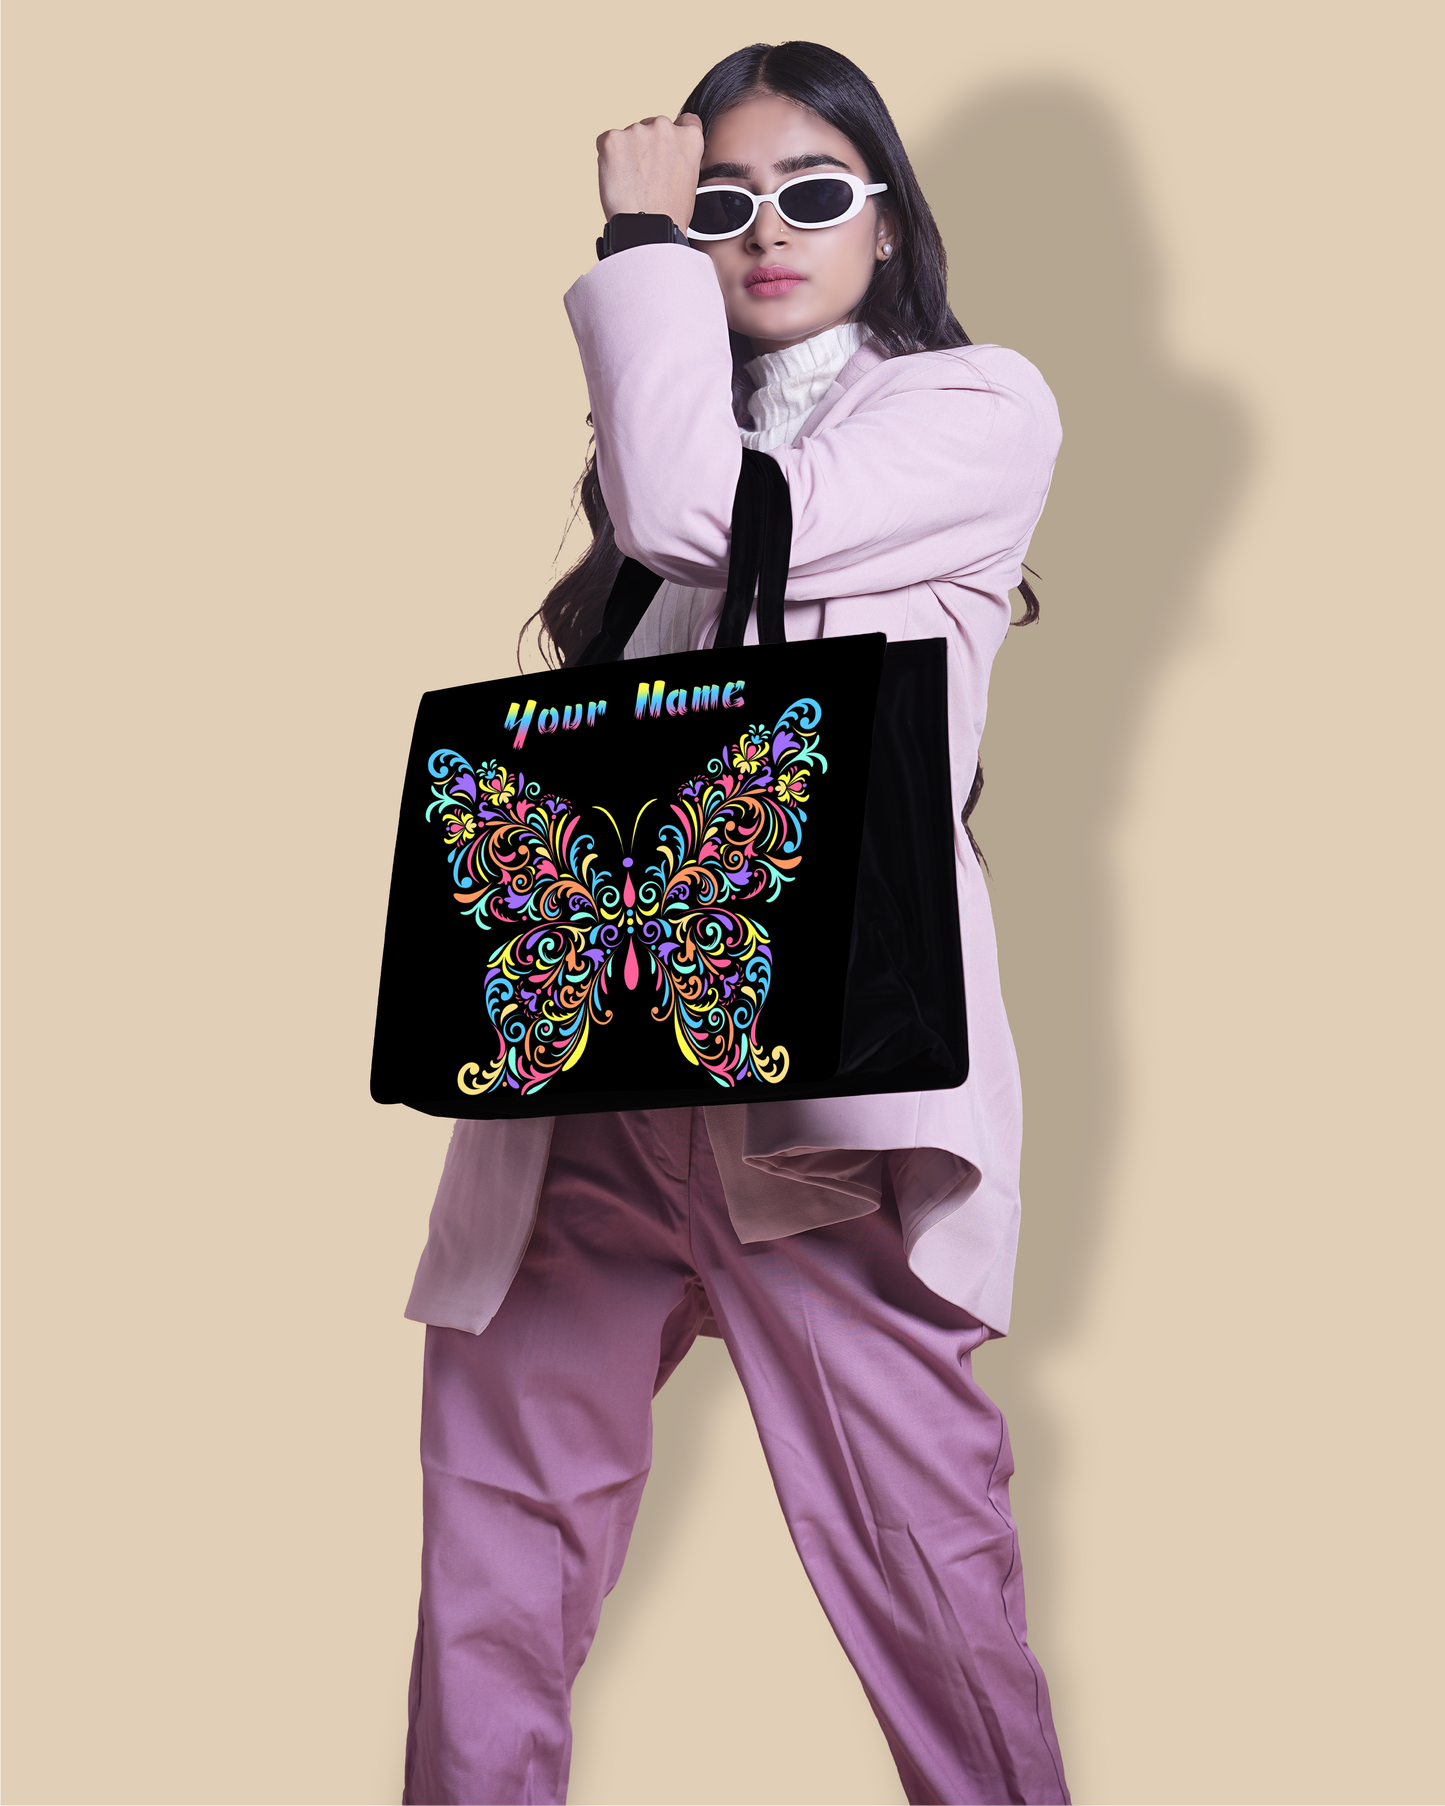 Personalized Tote Bag Designed With Colourfull butterflies Pattern